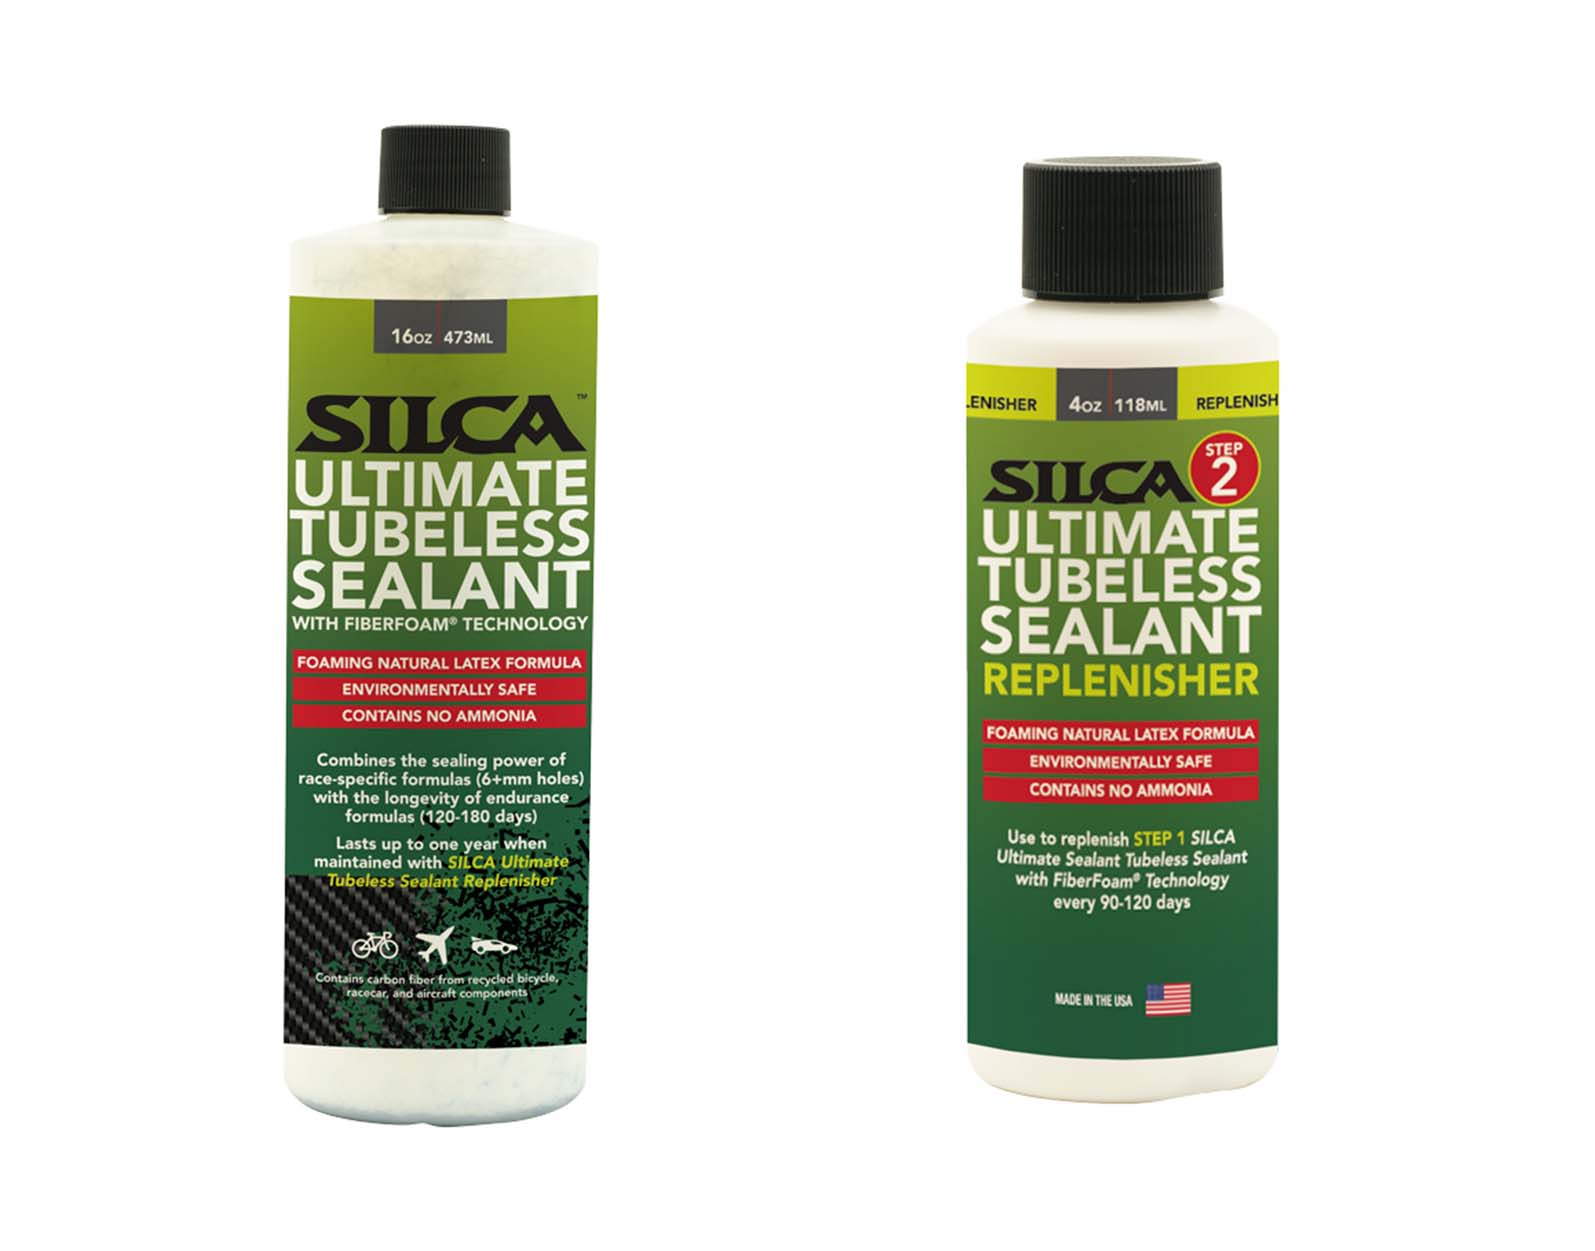 Silca ultimate tubeless sealant and replenisher 